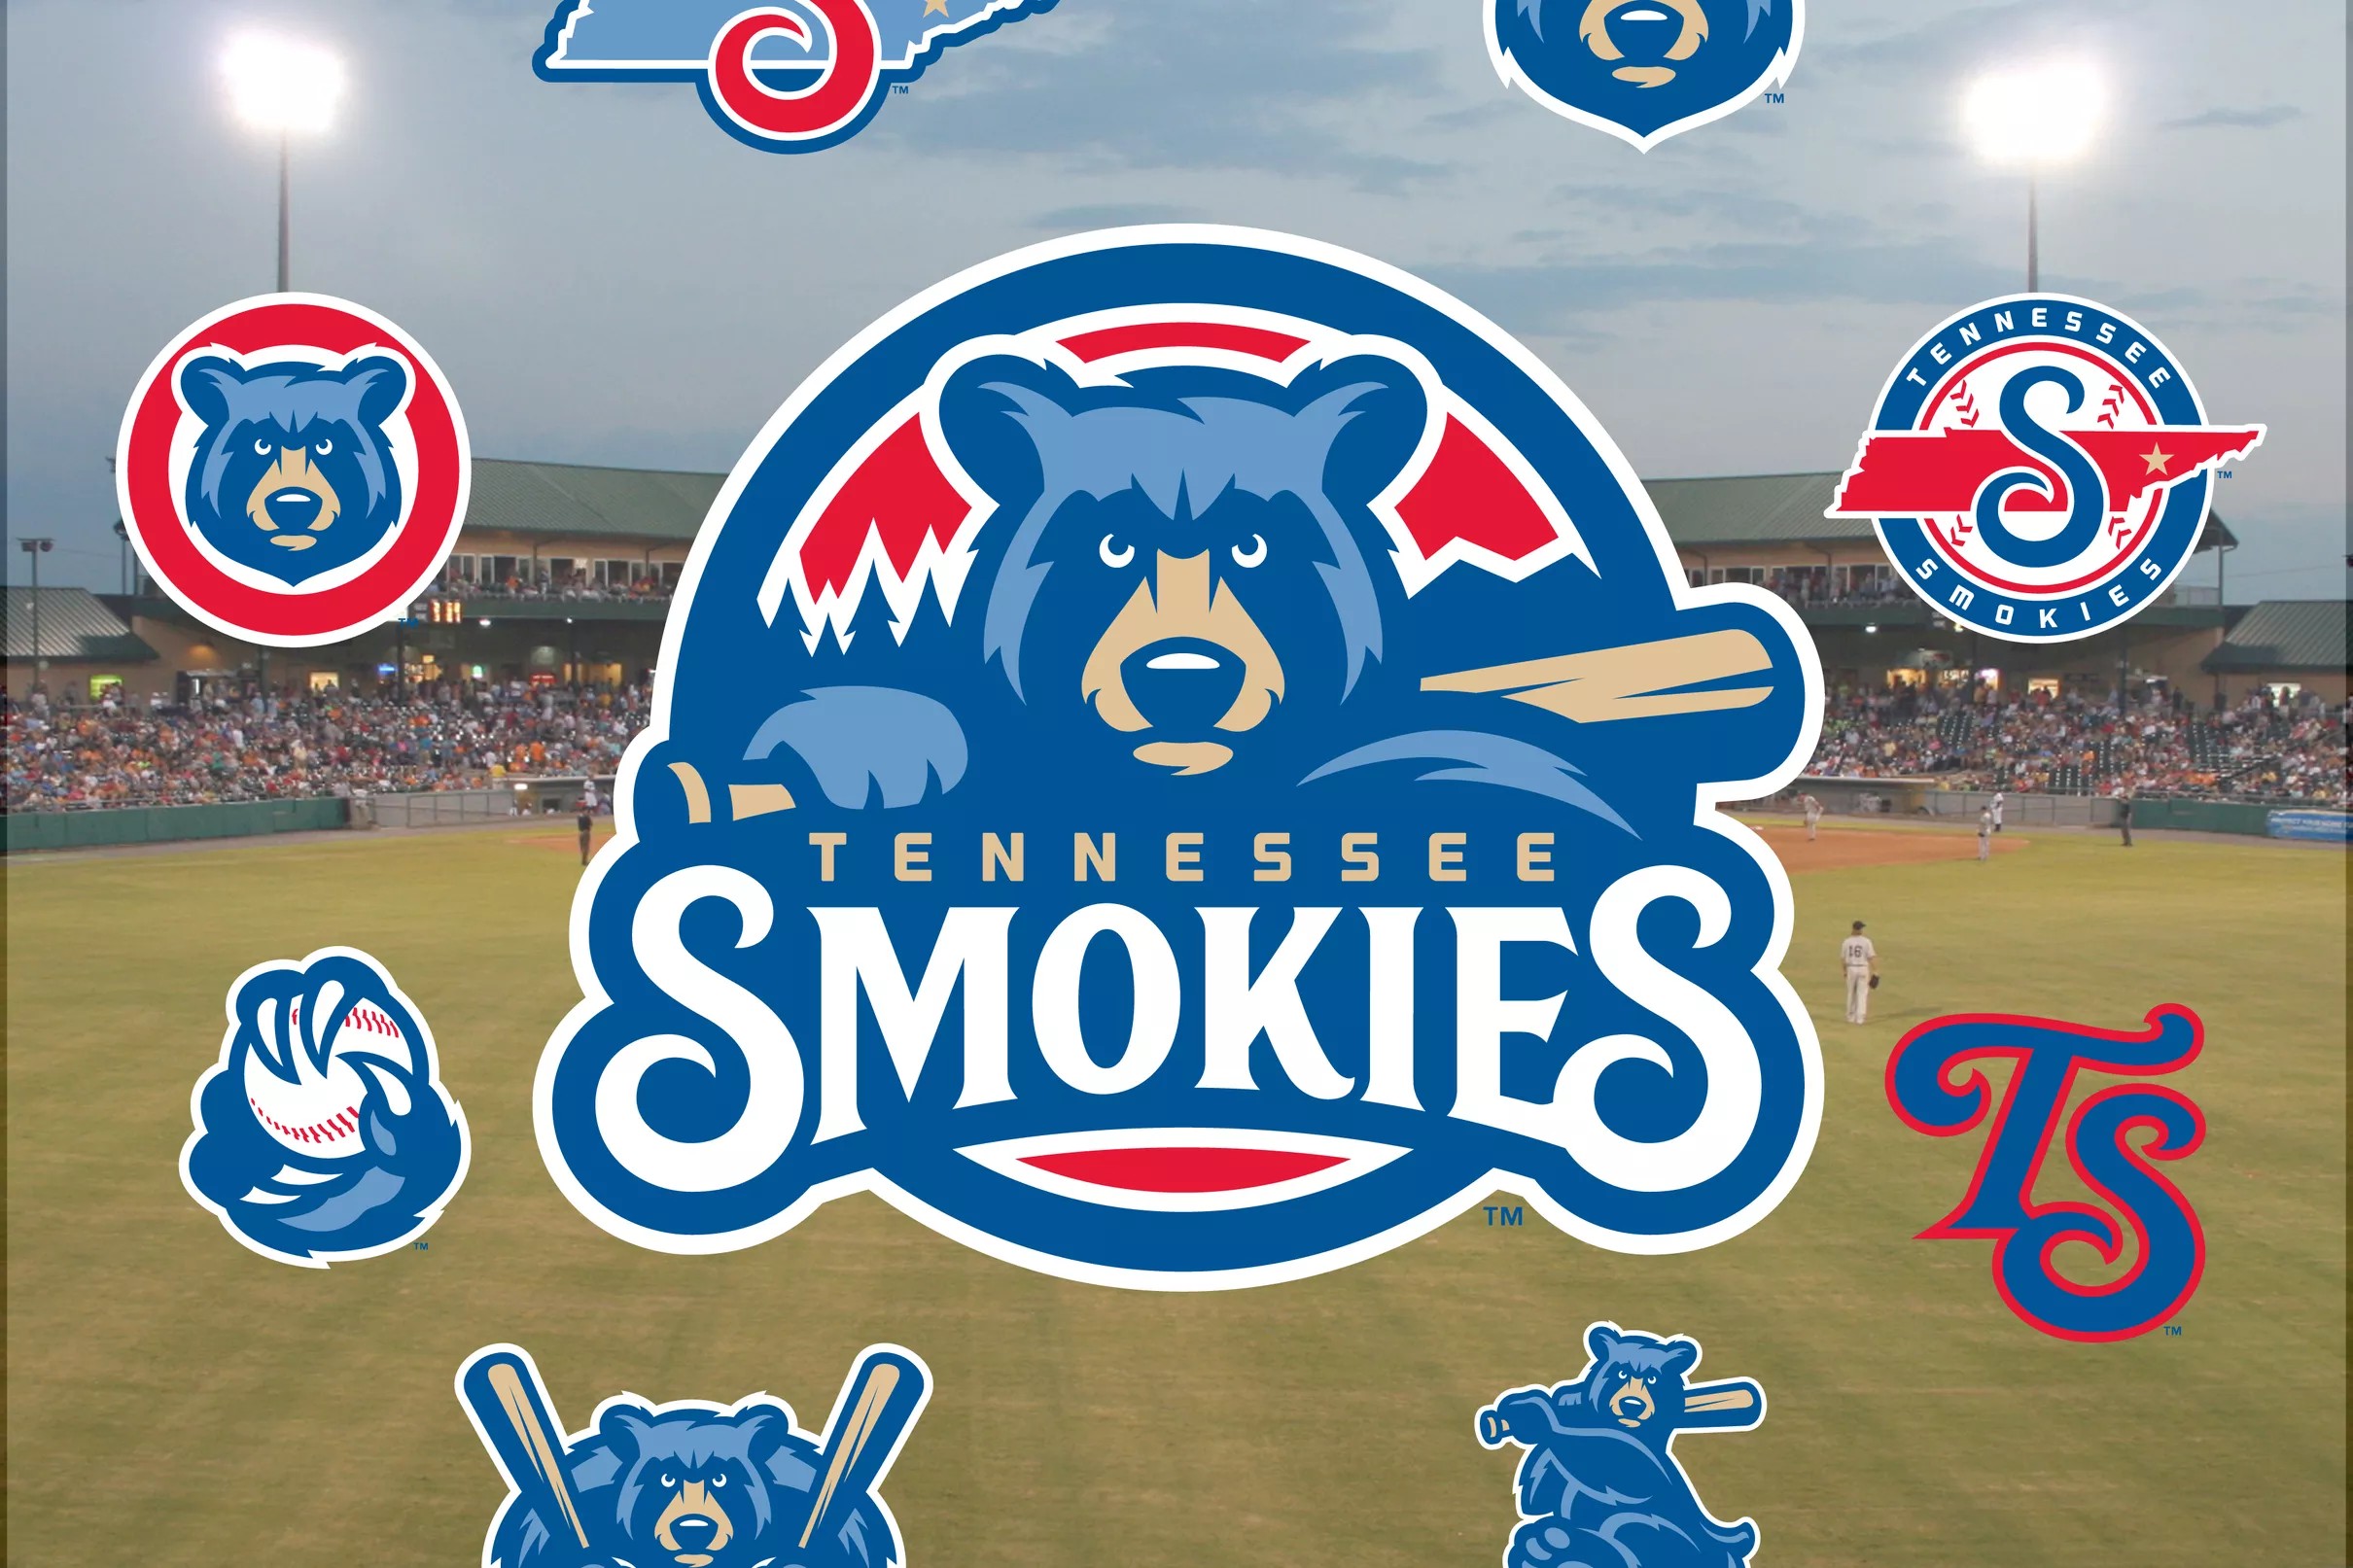 The Cubs’ Double-A affiliate will remain in Tennessee through 2020